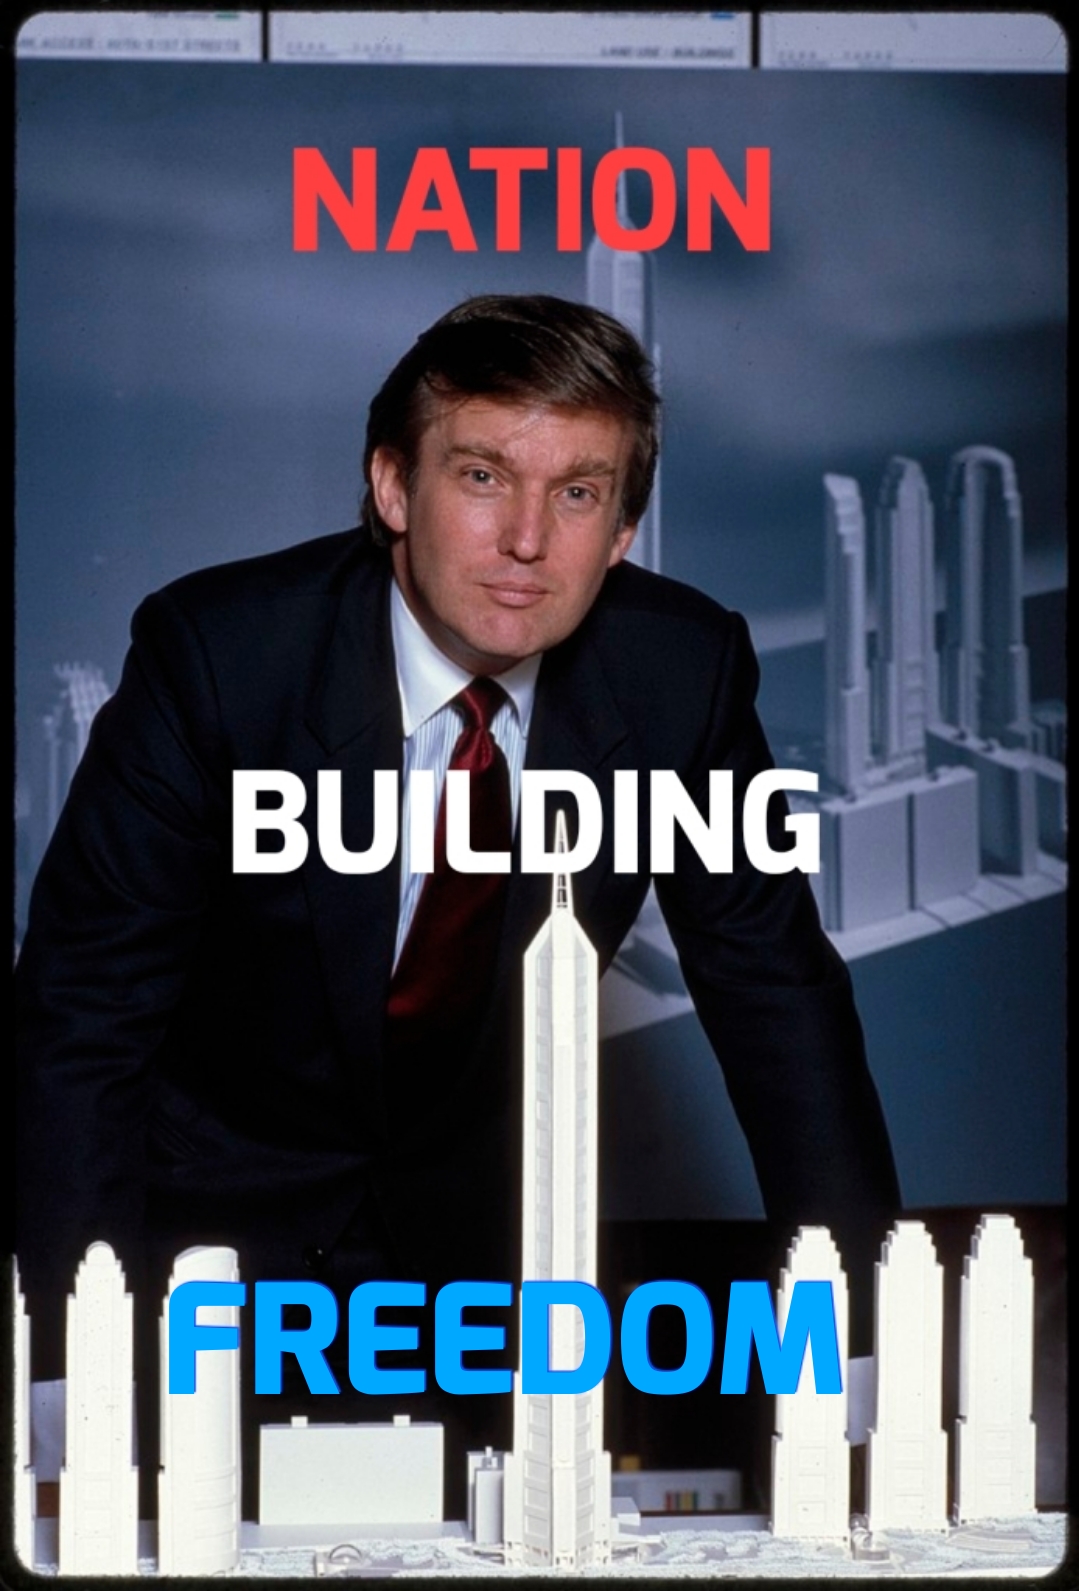 Donald Trumps Next Great Building – A Comprehensive Coalition For Freedom